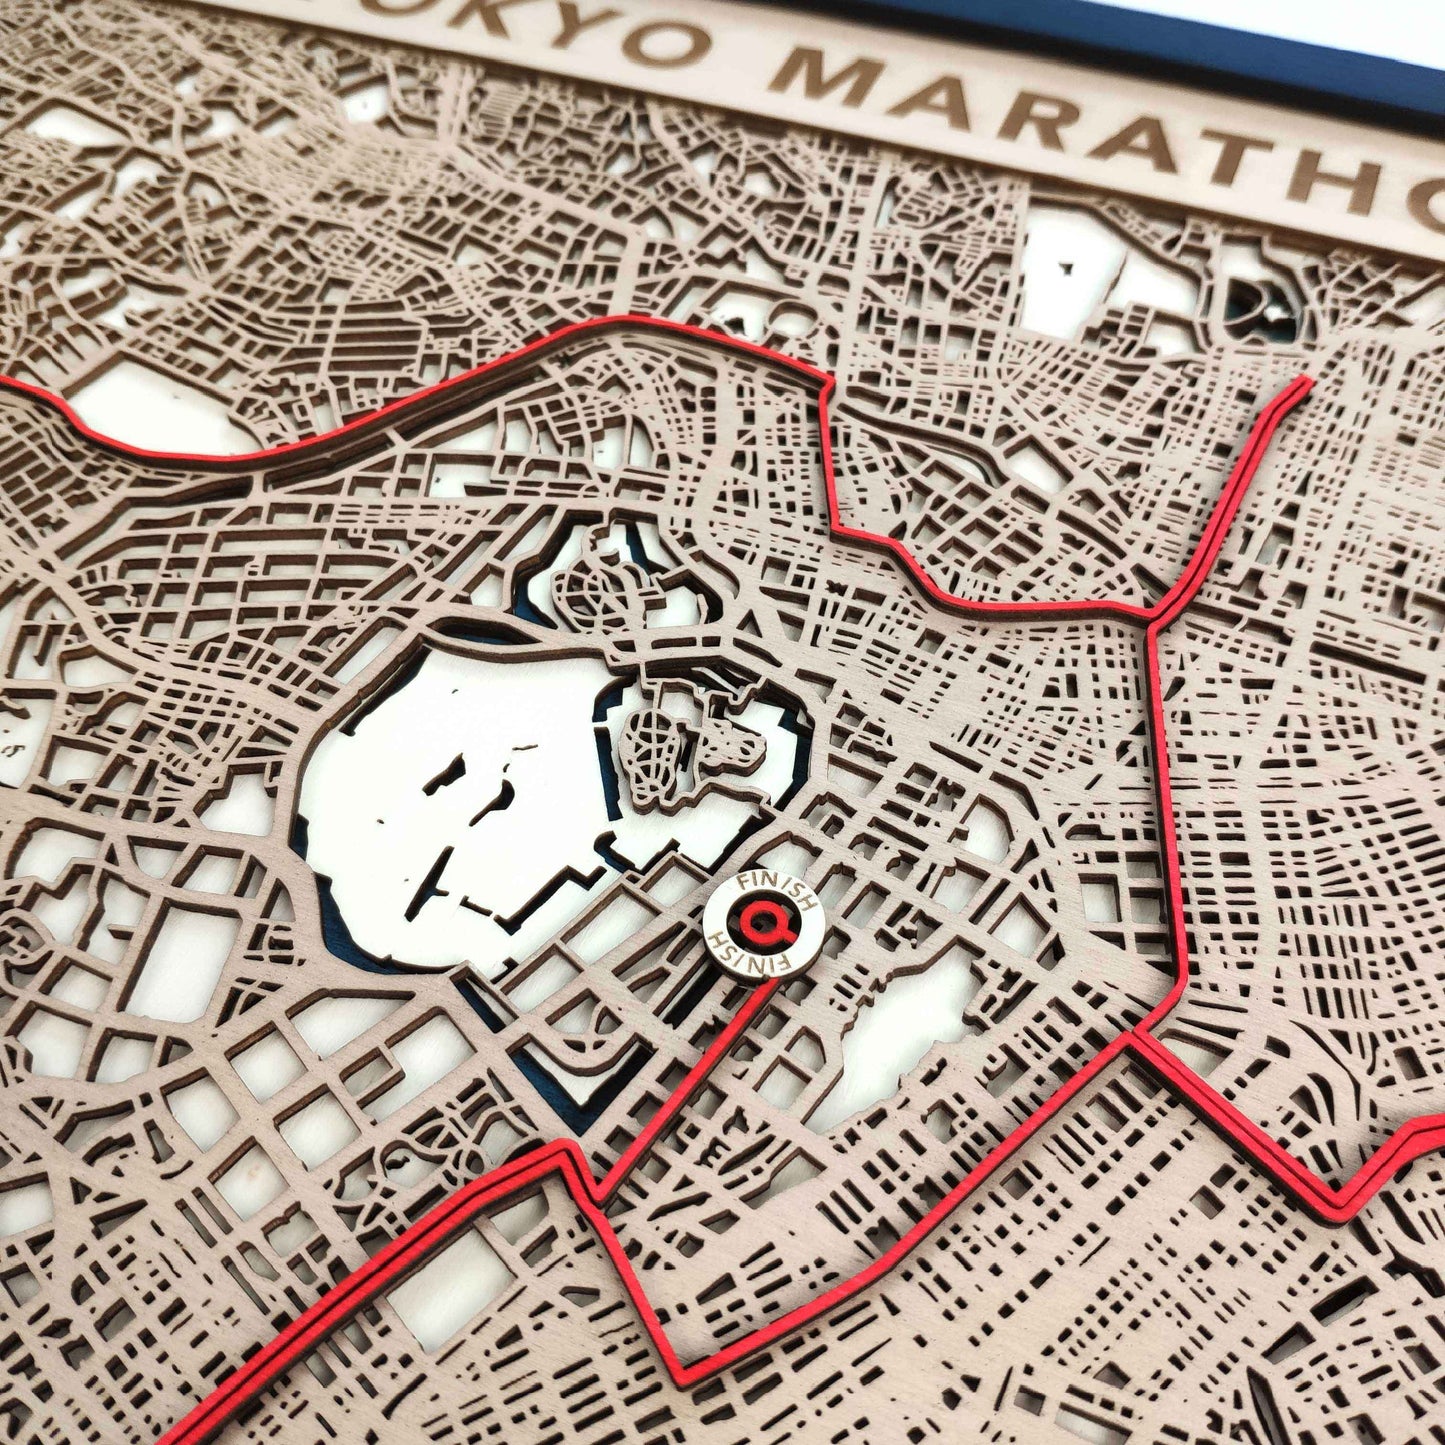 Tokyo Marathon Wooden Map by CityWood - Custom Wood Map Art - Unique Laser Cut Engraved - Anniversary Gift